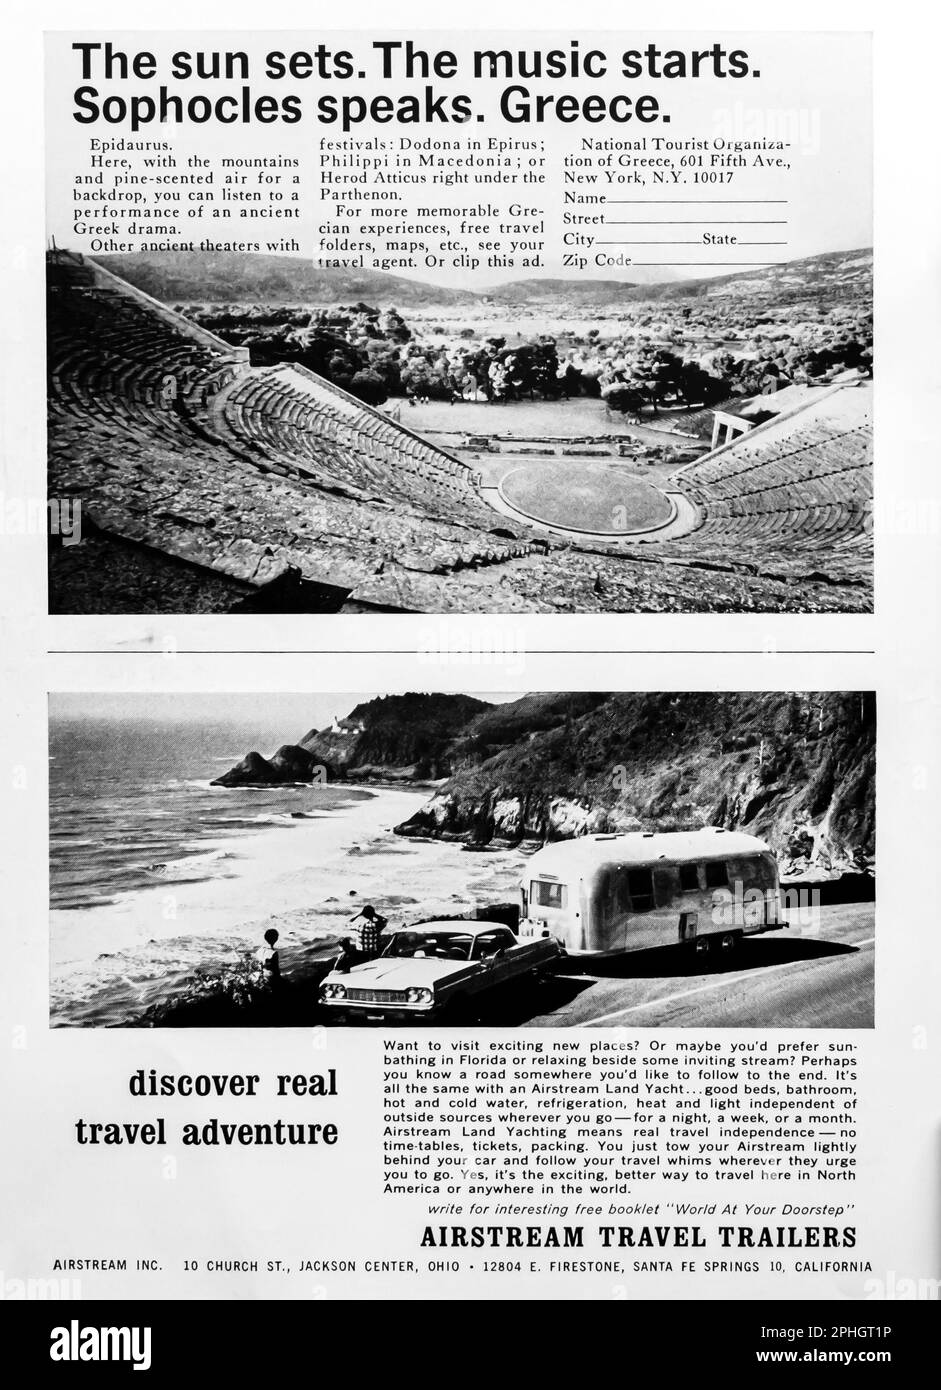 Airstream Travel Trailers advert in a Natgeo magazine, March 1966 Stock Photo